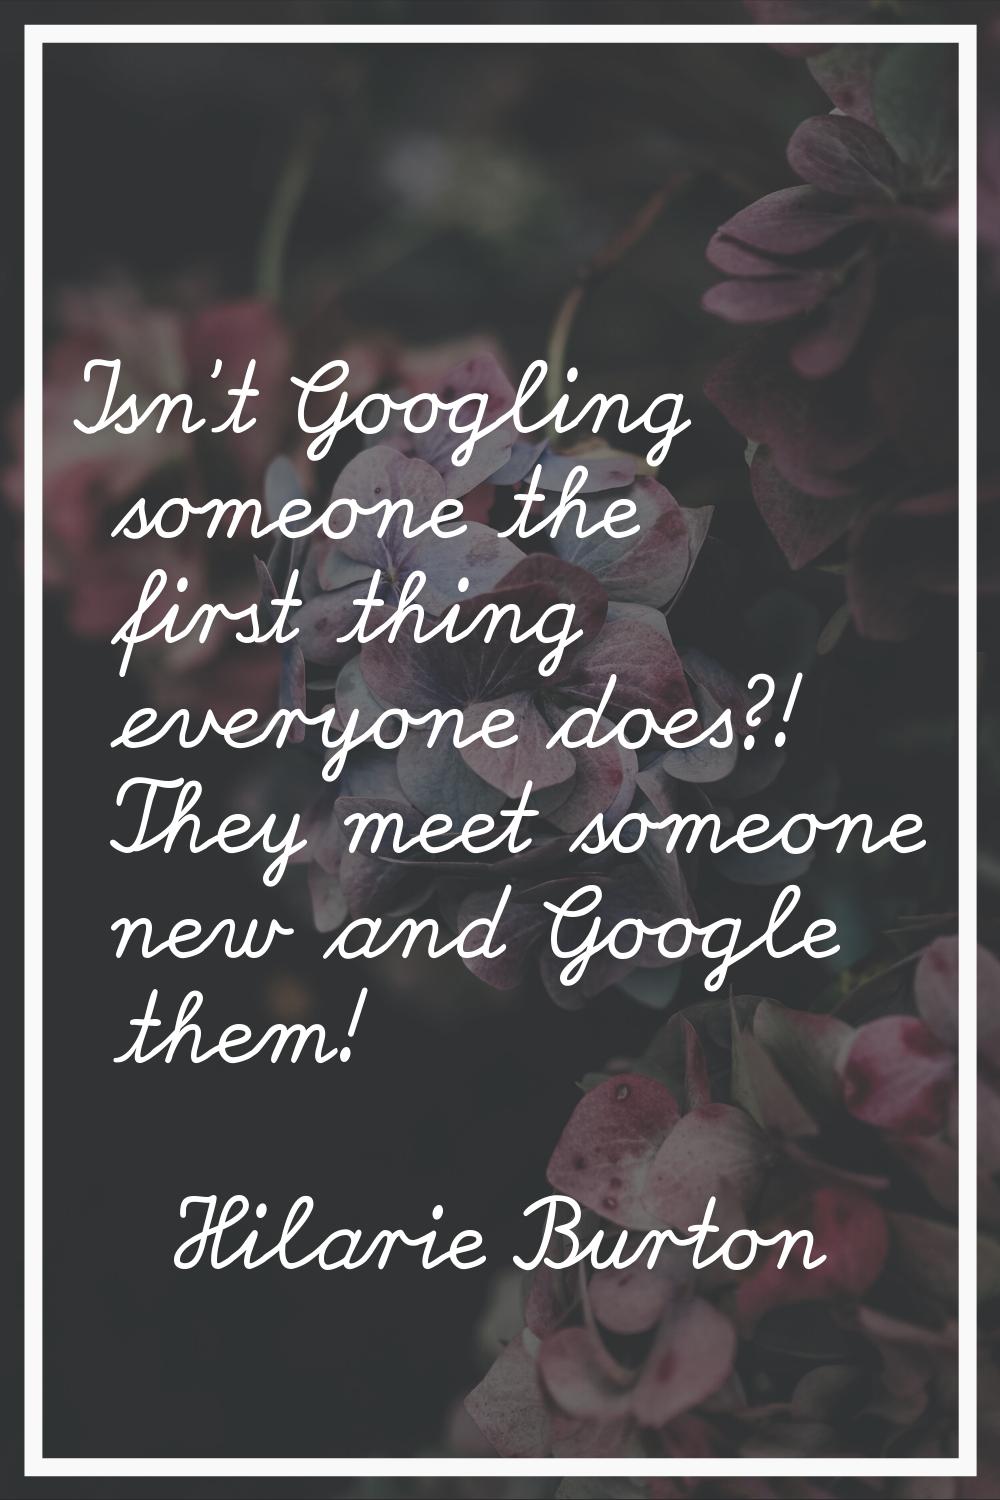 Isn't Googling someone the first thing everyone does?! They meet someone new and Google them!